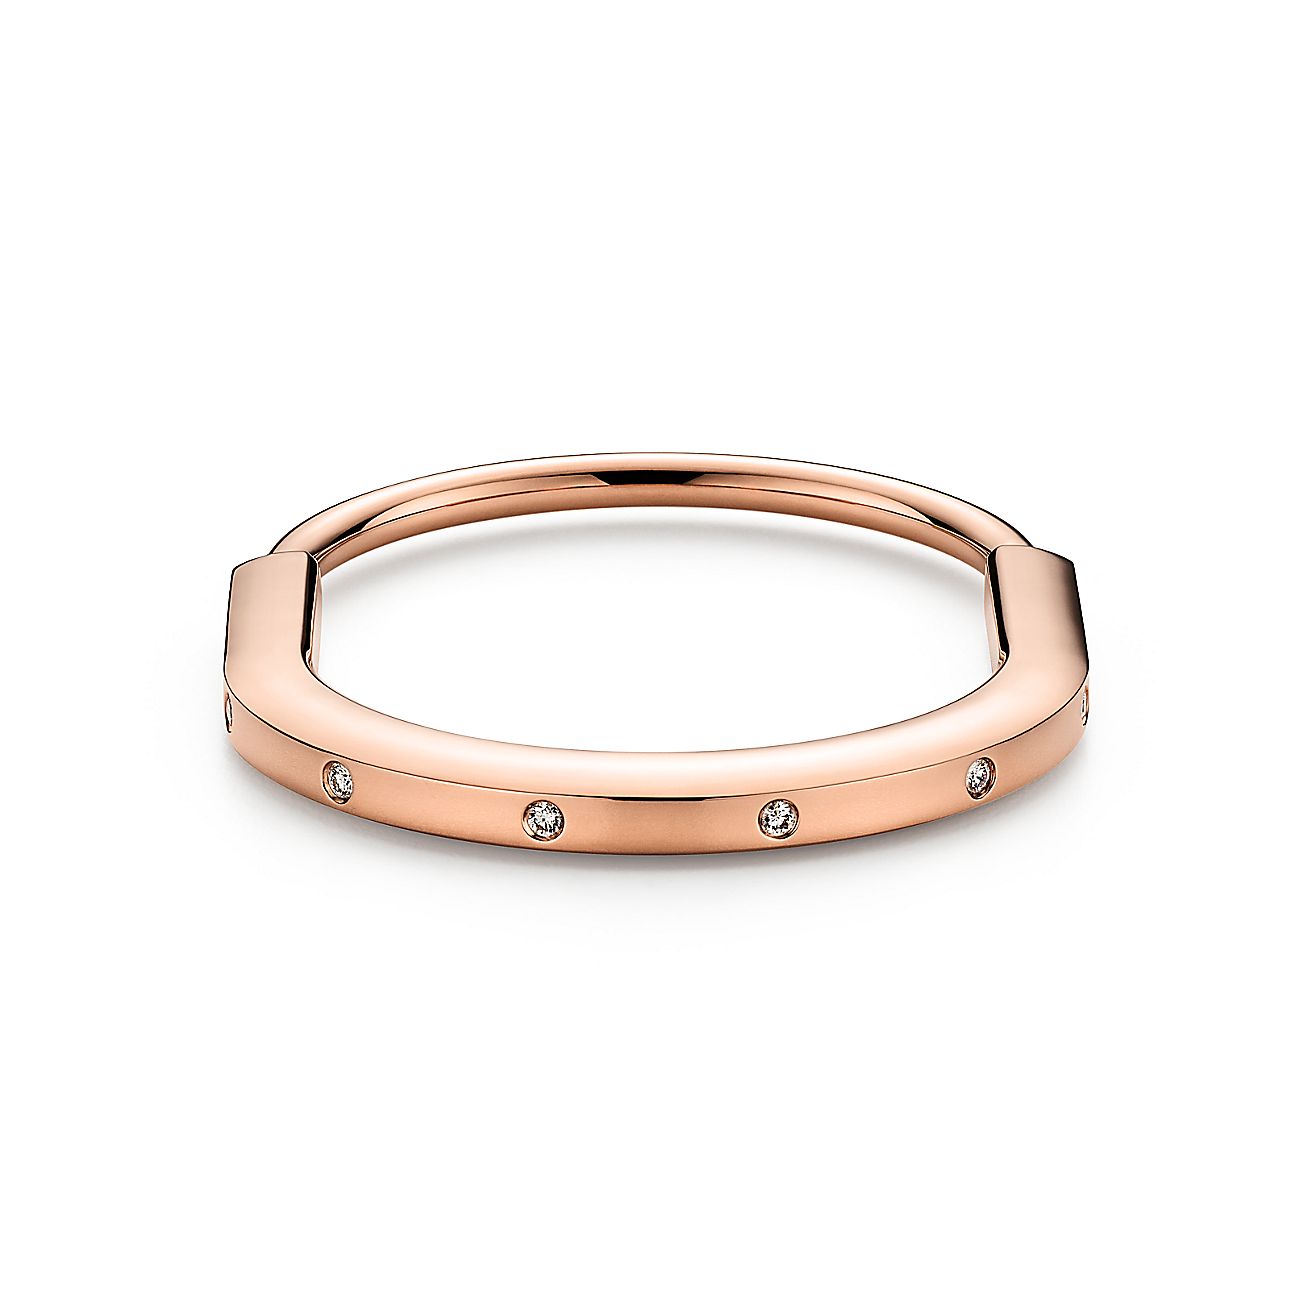 Tiffany Lock Rosé Edition Bangle Bracelet in Rose Gold with Pink Sapphires, Size: Medium